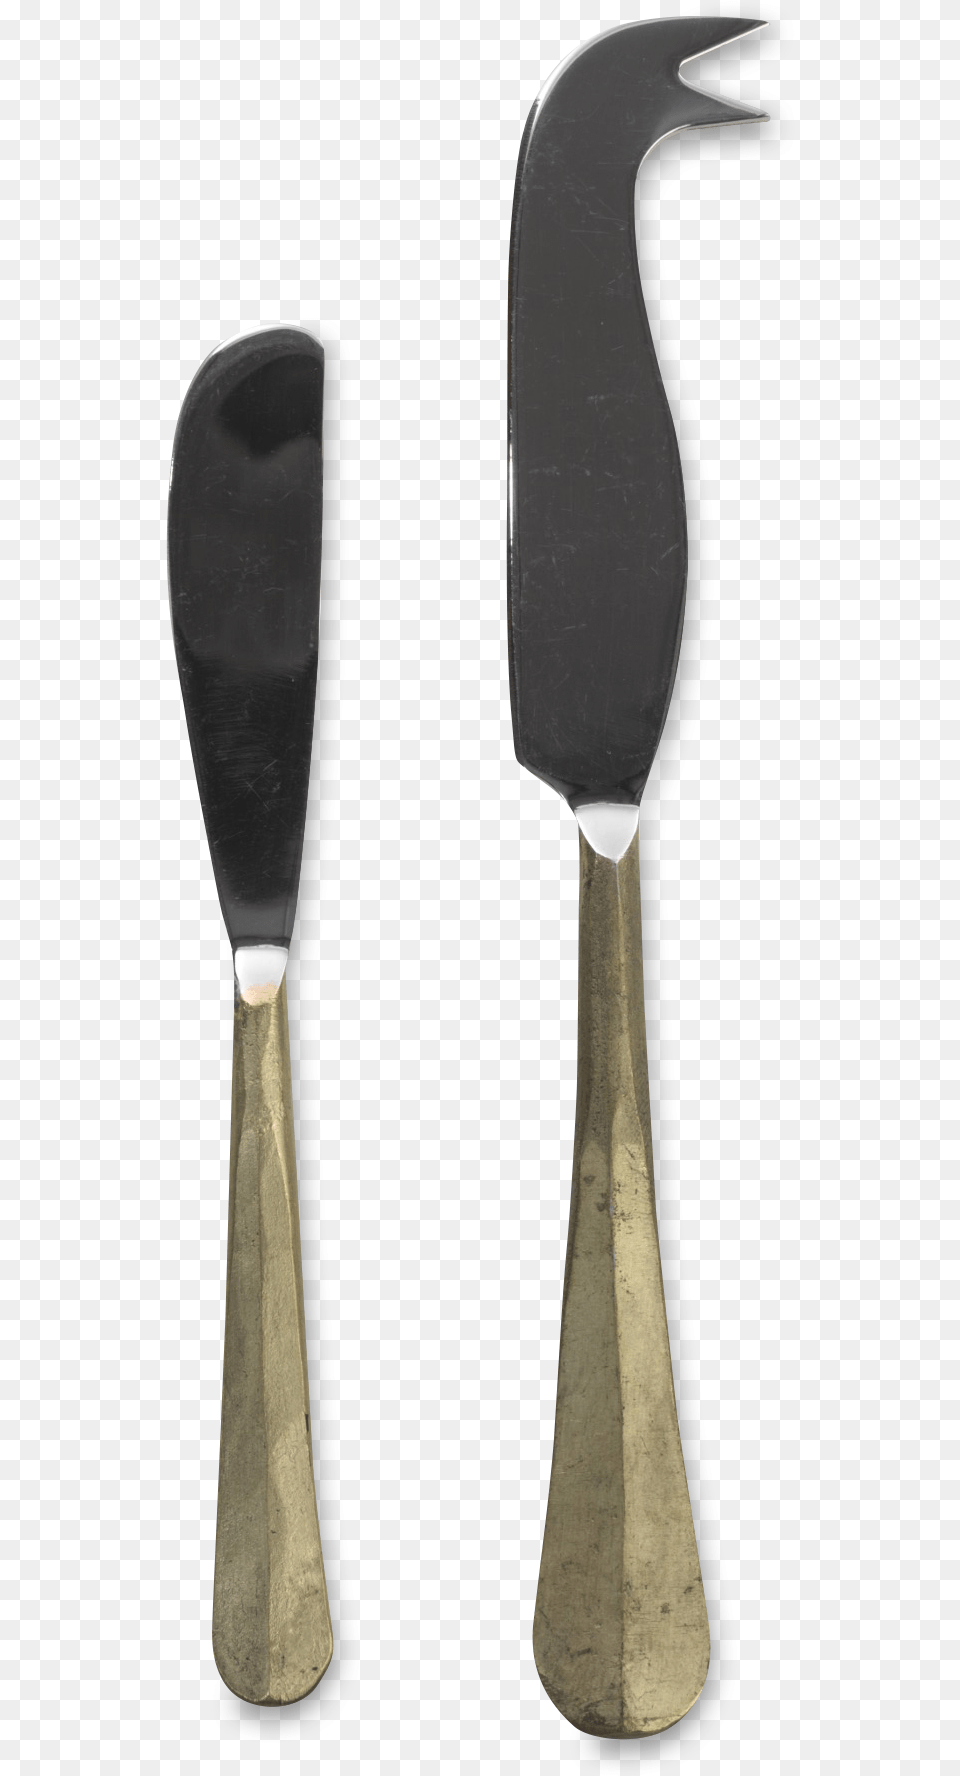 Cheese Amp Butter Knife Set Paddle, Cutlery, Fork, Spoon, Field Hockey Png Image